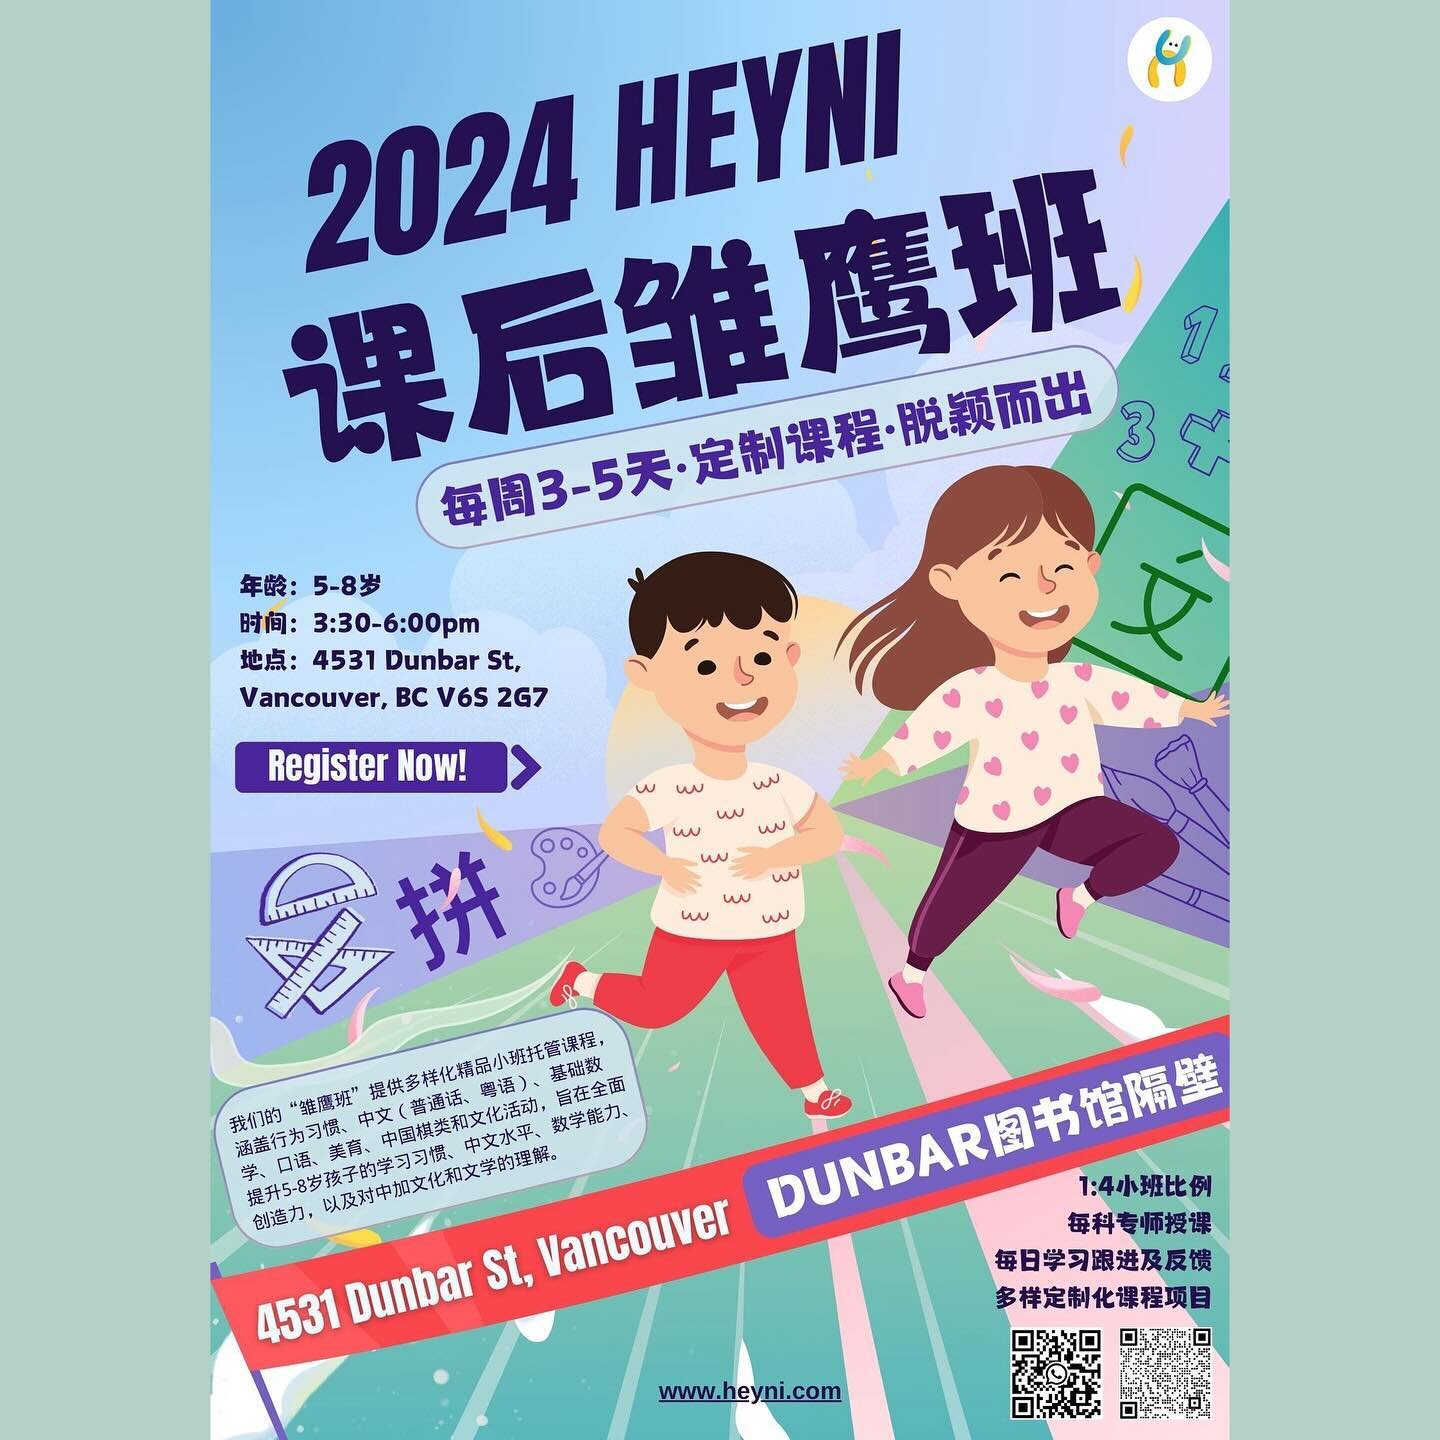 Vancouver Small Class After School Care | Heyni Eaglet Program
🌟 Exceptional 1:4 Teacher-Student Ratio
🌟 Expert-led classes in each subject
🌟 Covers Behavioral Habits, Mandarin &amp; Cantonese Chinese, Fundamental Math, Oral Skills, Fine Arts, Chi